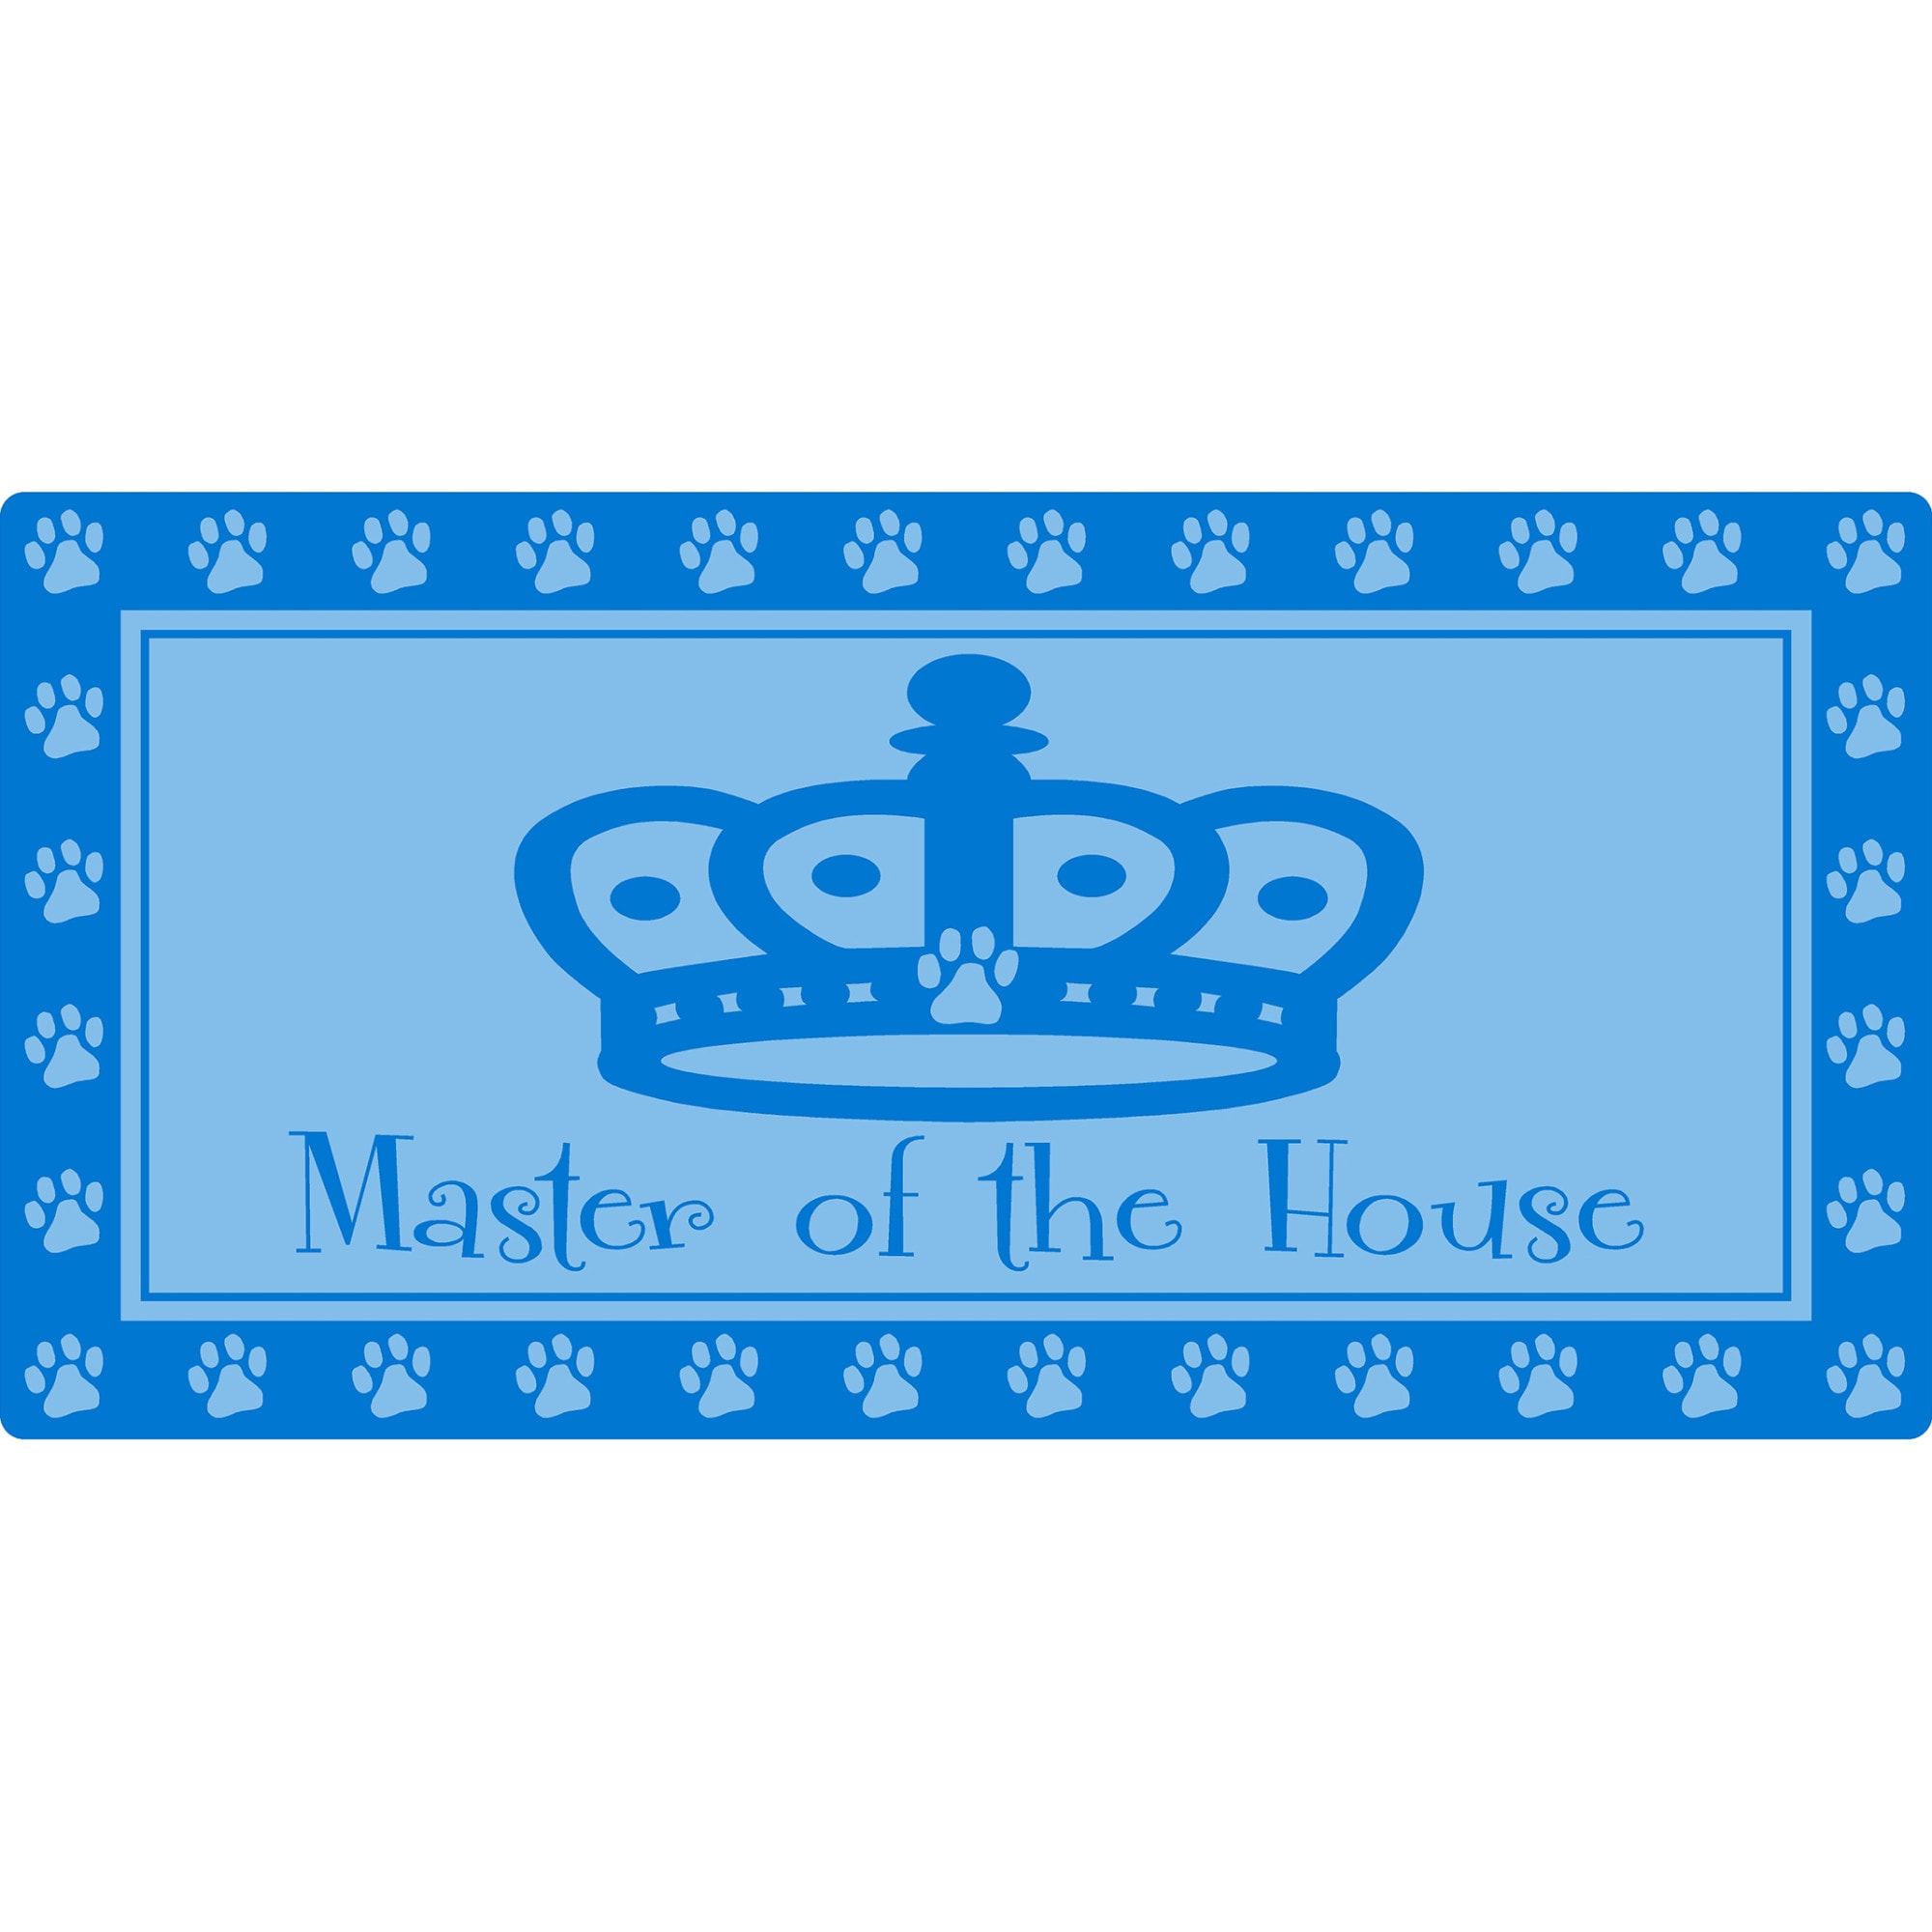 Photos - Photo Frame / Album Hillman Sign Center-- Master of the House, 10" L X 5" H, 10 IN, 10 